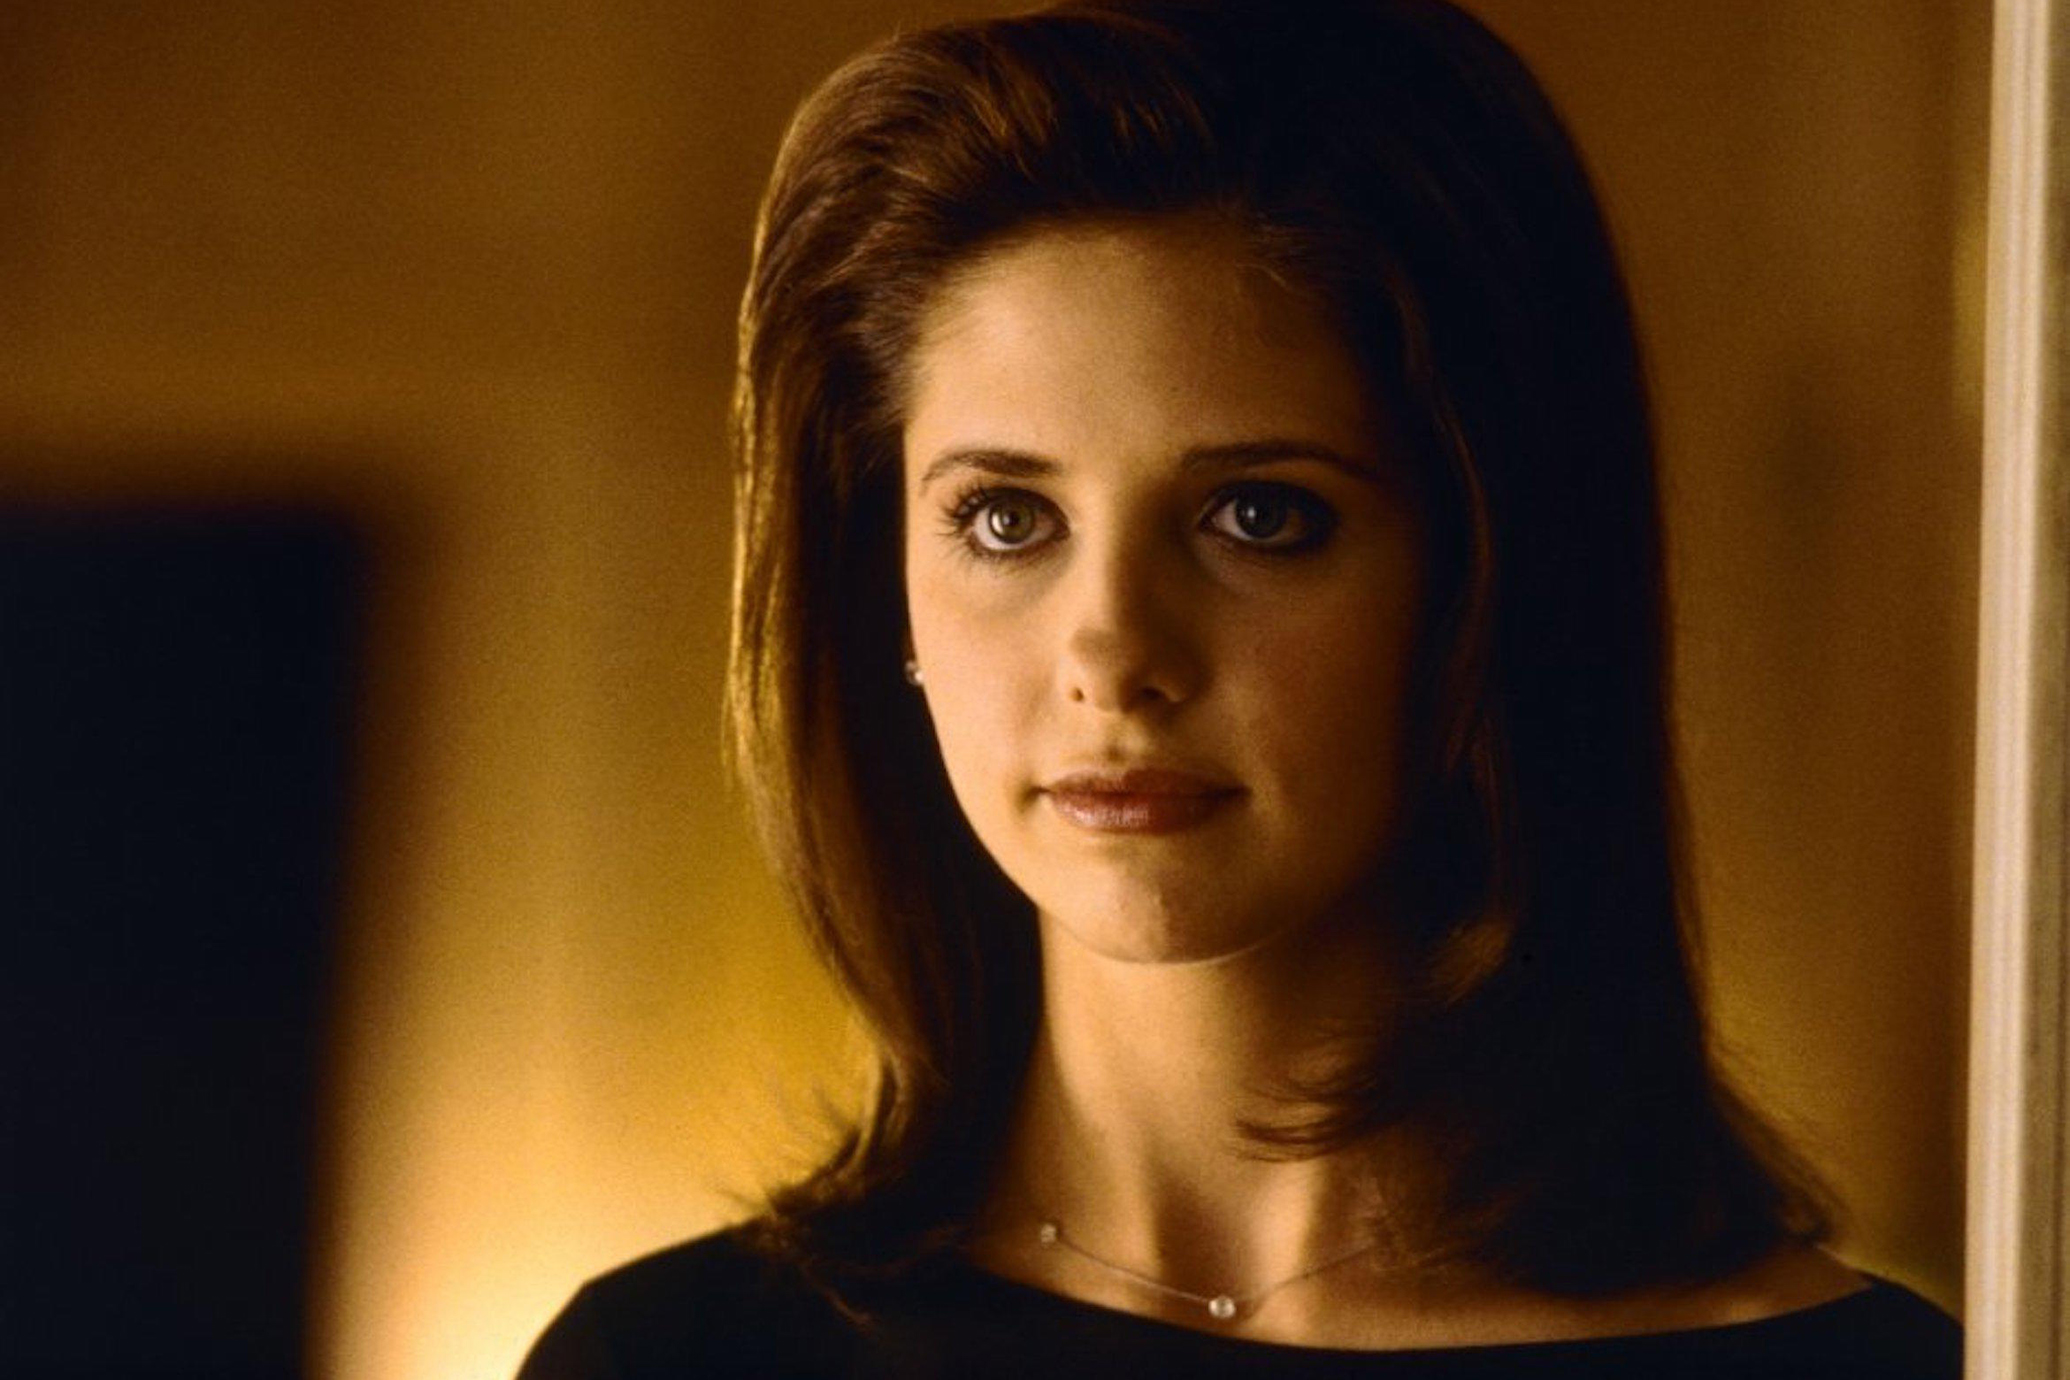 In honor of the 20th anniversary of Cruel Intentions, a